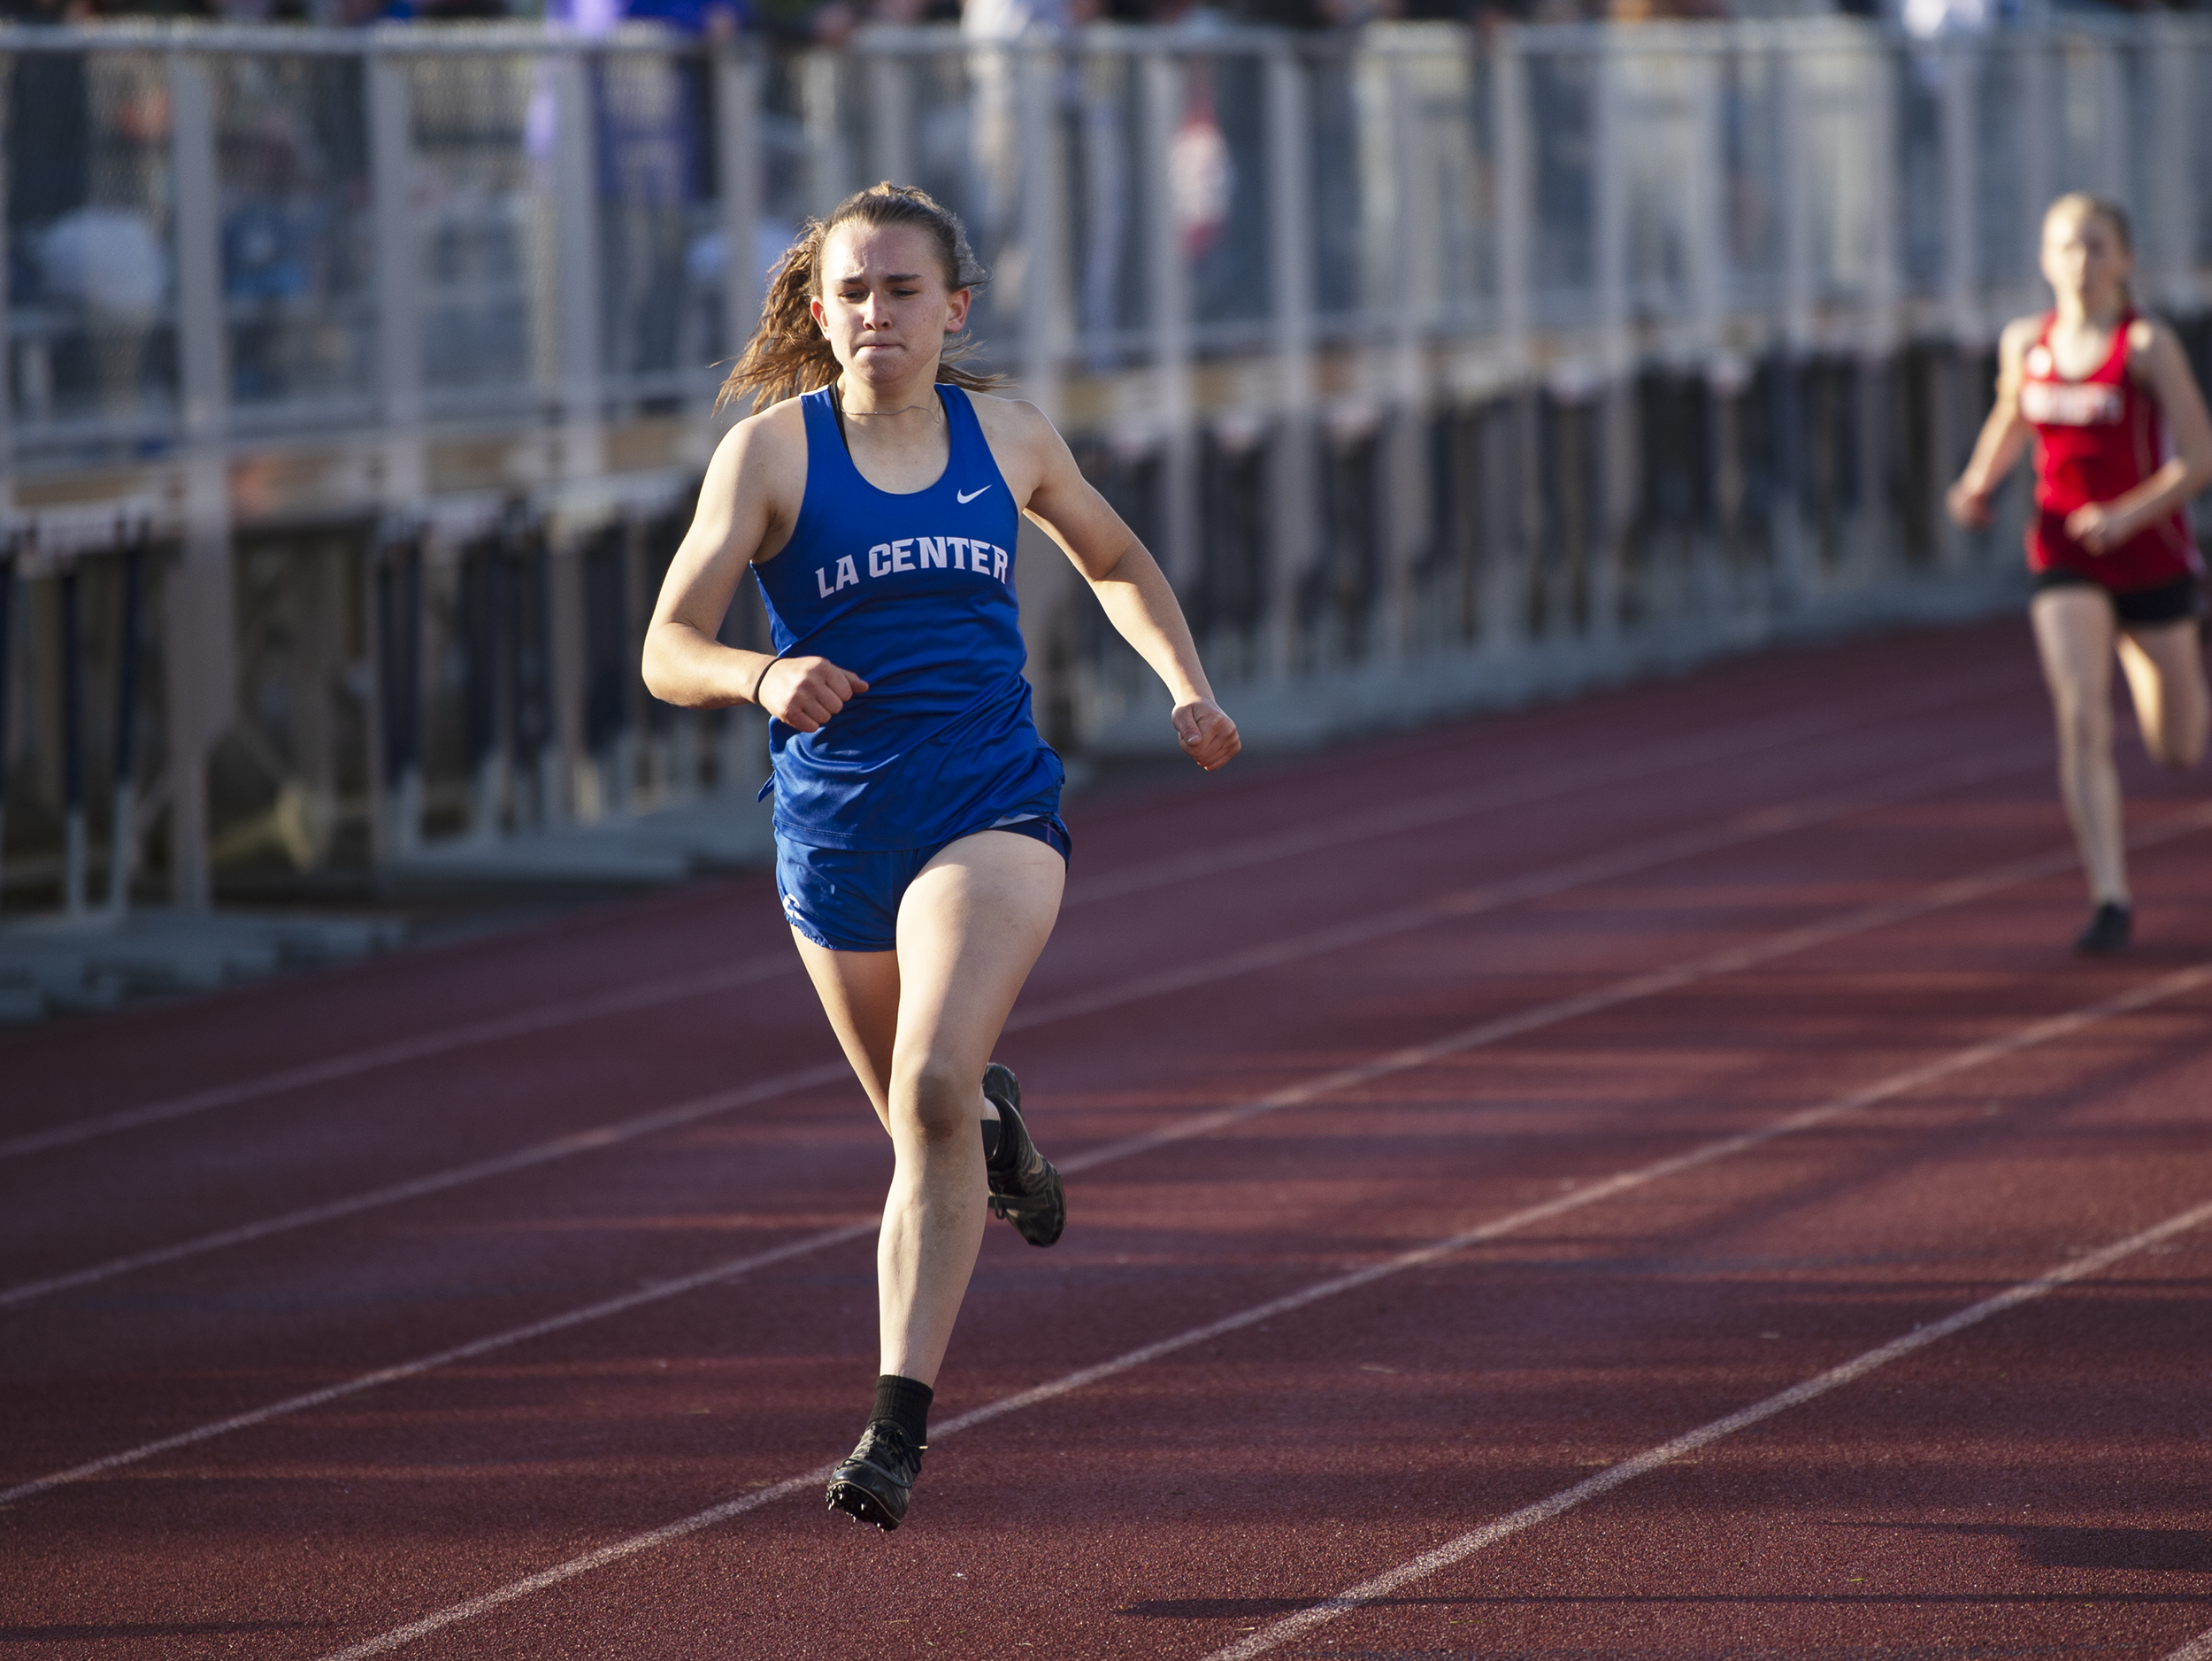 La Center's Shaela Bradley runs to victory in the girls 400 meters at the Class 1A District 4 track and field meet at Seton Catholic on Thursday, May 19, 2022.